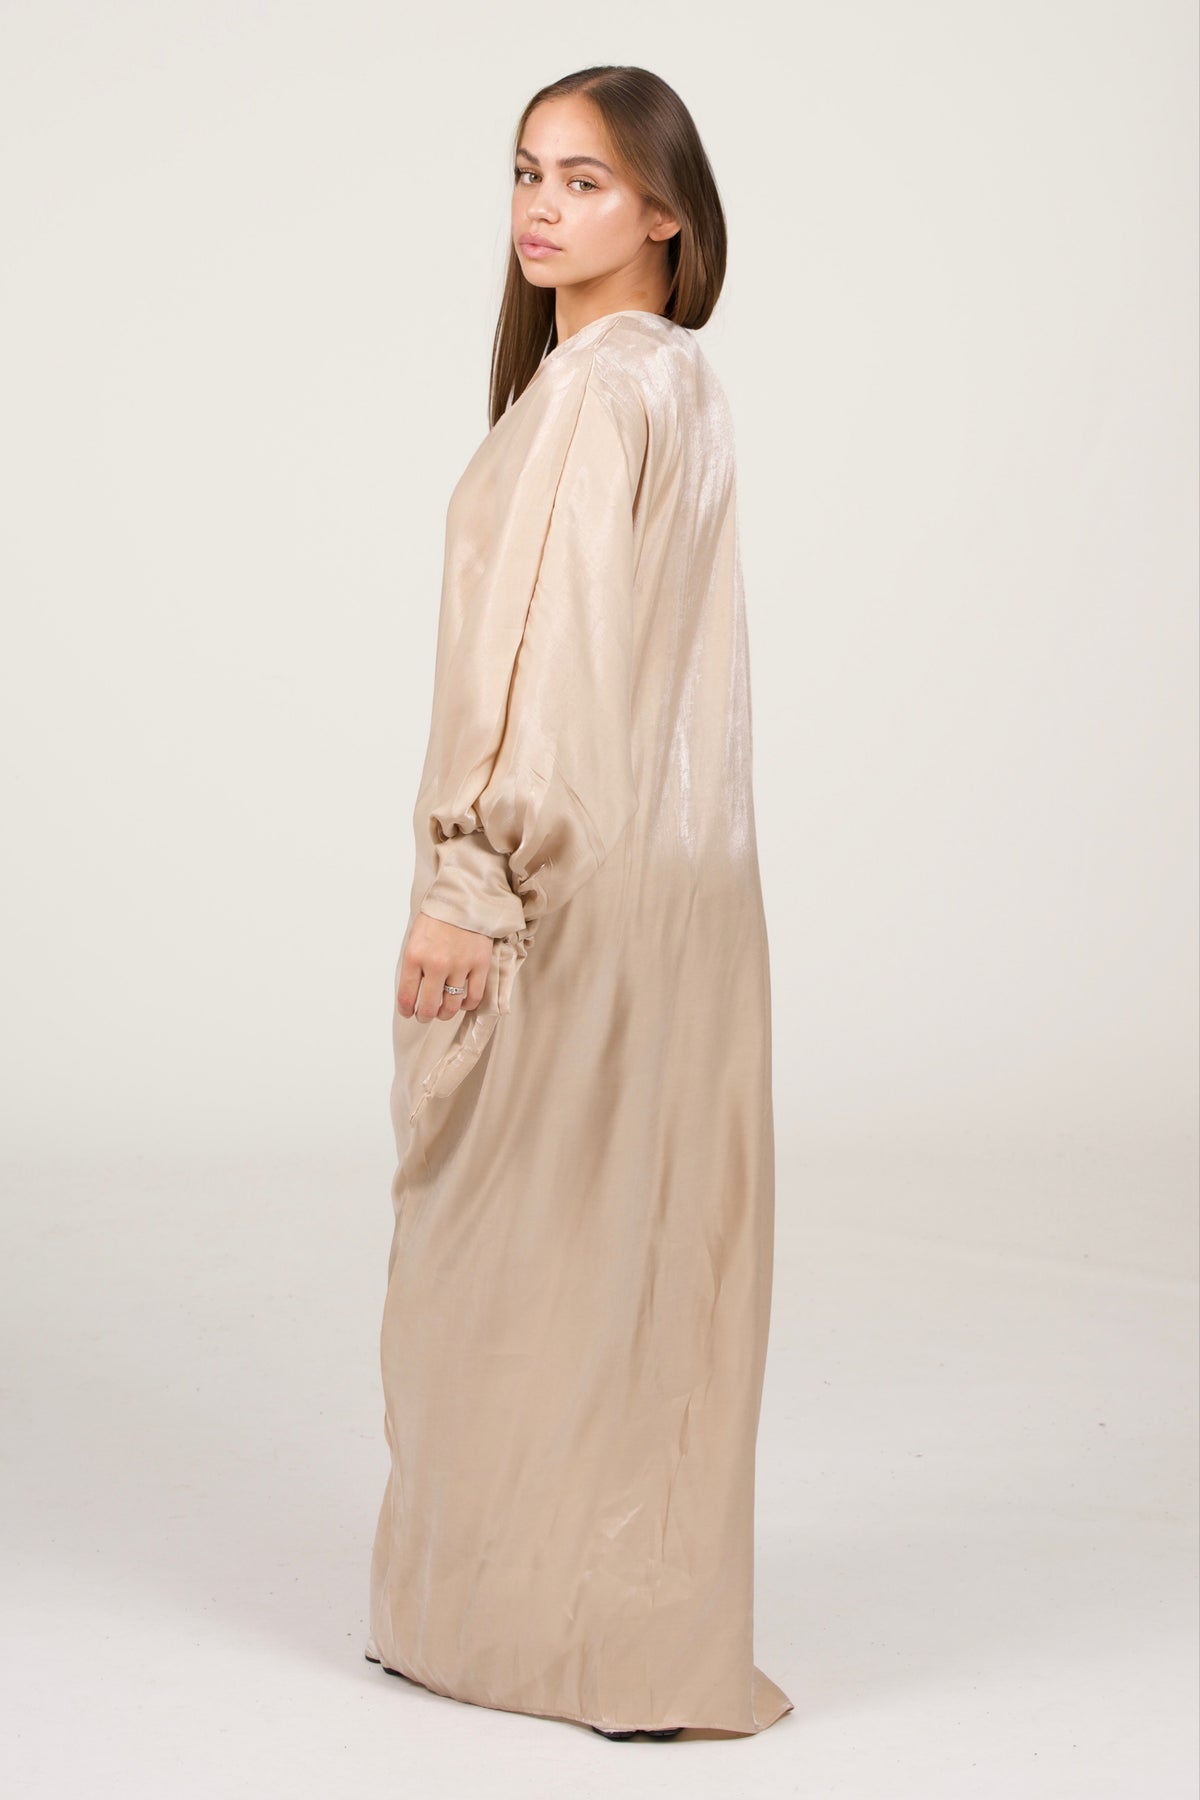 Shiny Beige Kimono With Bows On The Sleeves